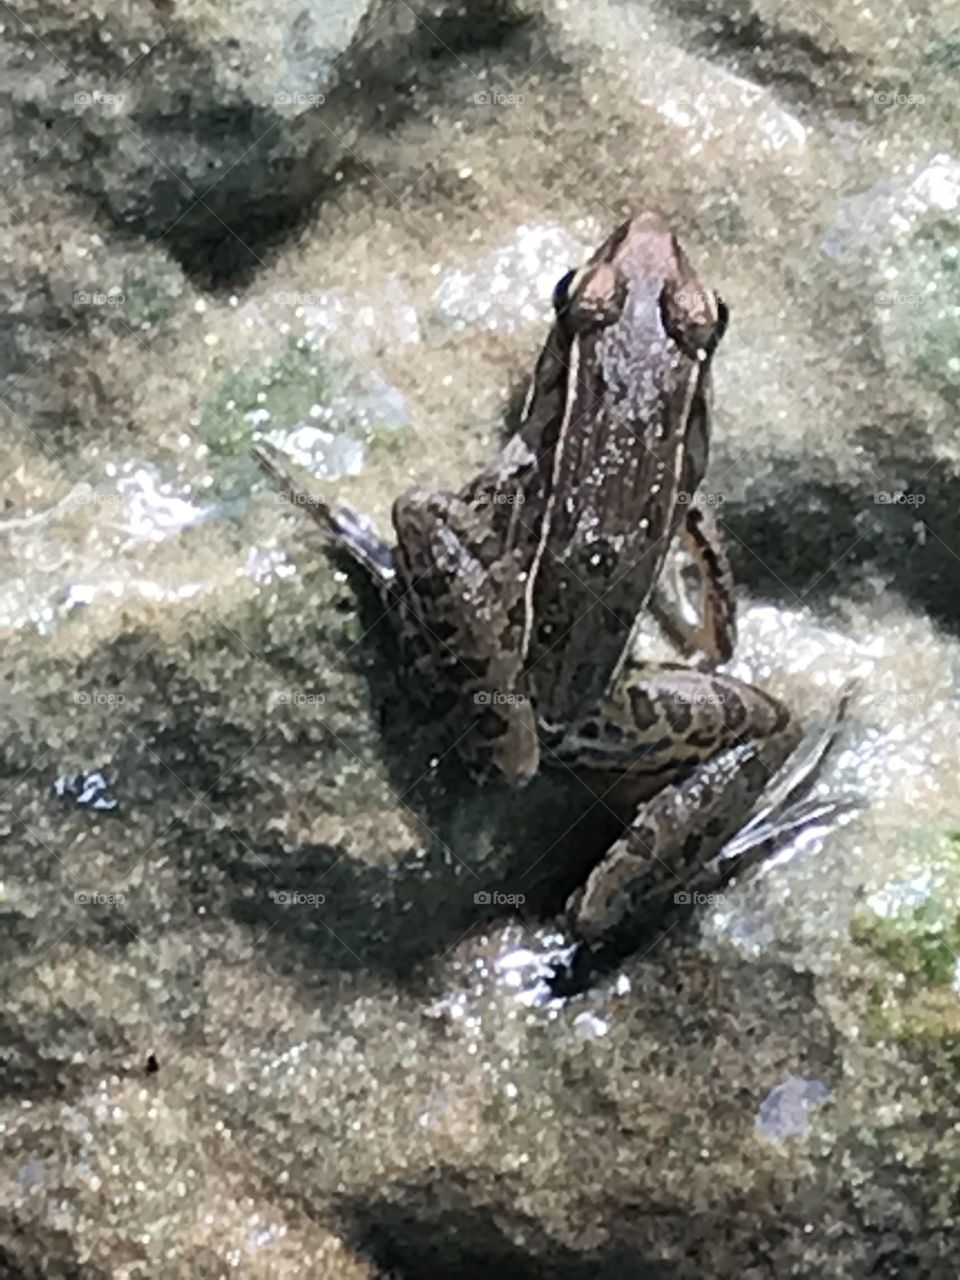 I love seeing frogs in the yard!